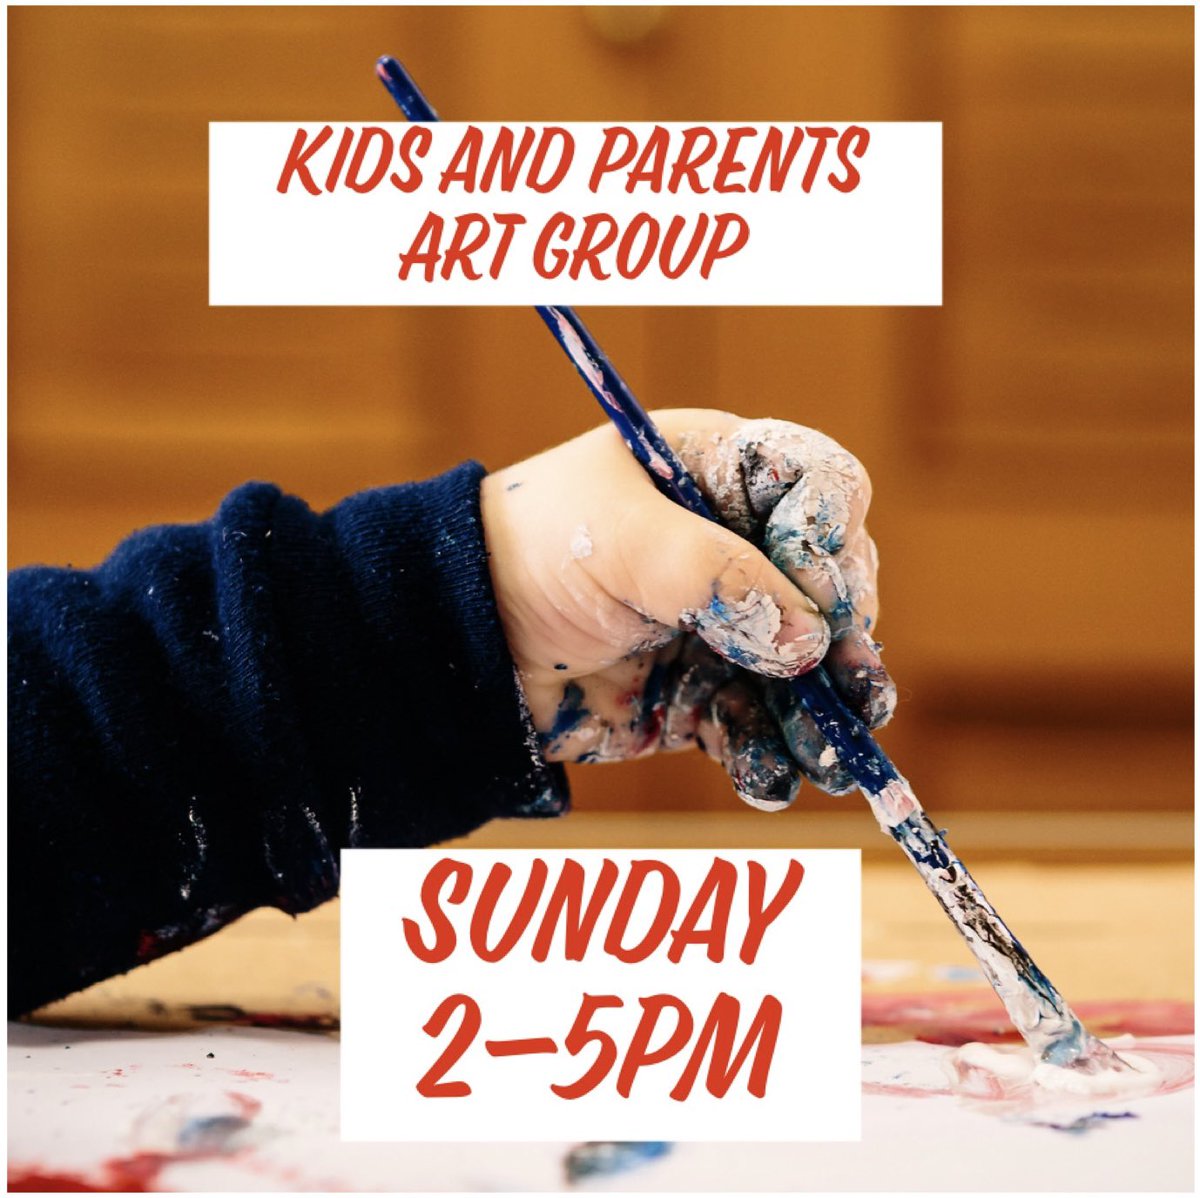 Come along to our
KIDS and PARENTS ART CLUB

This Sunday 2-5pm
Create art, relax, chat

Refreshments are available

Donations requested

All children must be accompanied by their parent/carer

#kidsartclub #kidsandparentsartclub #artclub #halftermactivities #art #craft #making